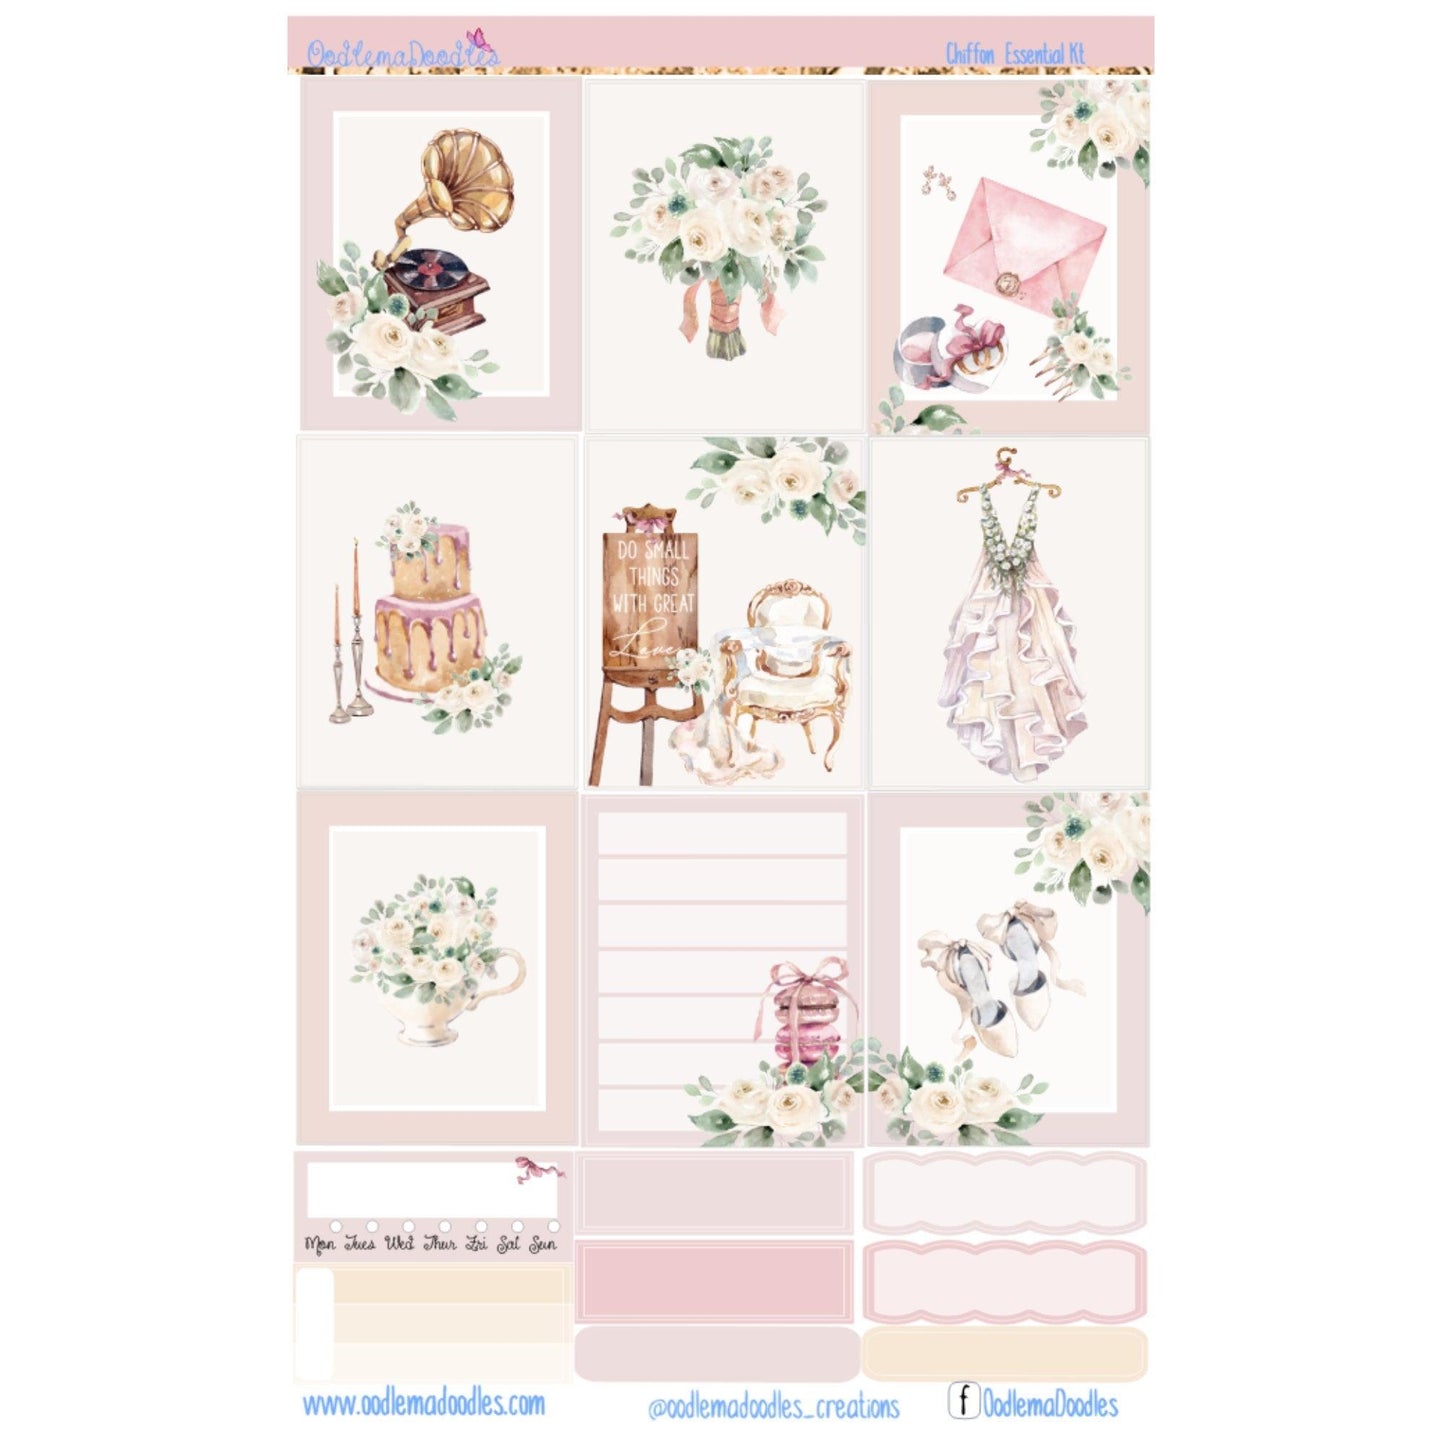 Chiffon Essential Planner Sticker Kit - oodlemadoodles